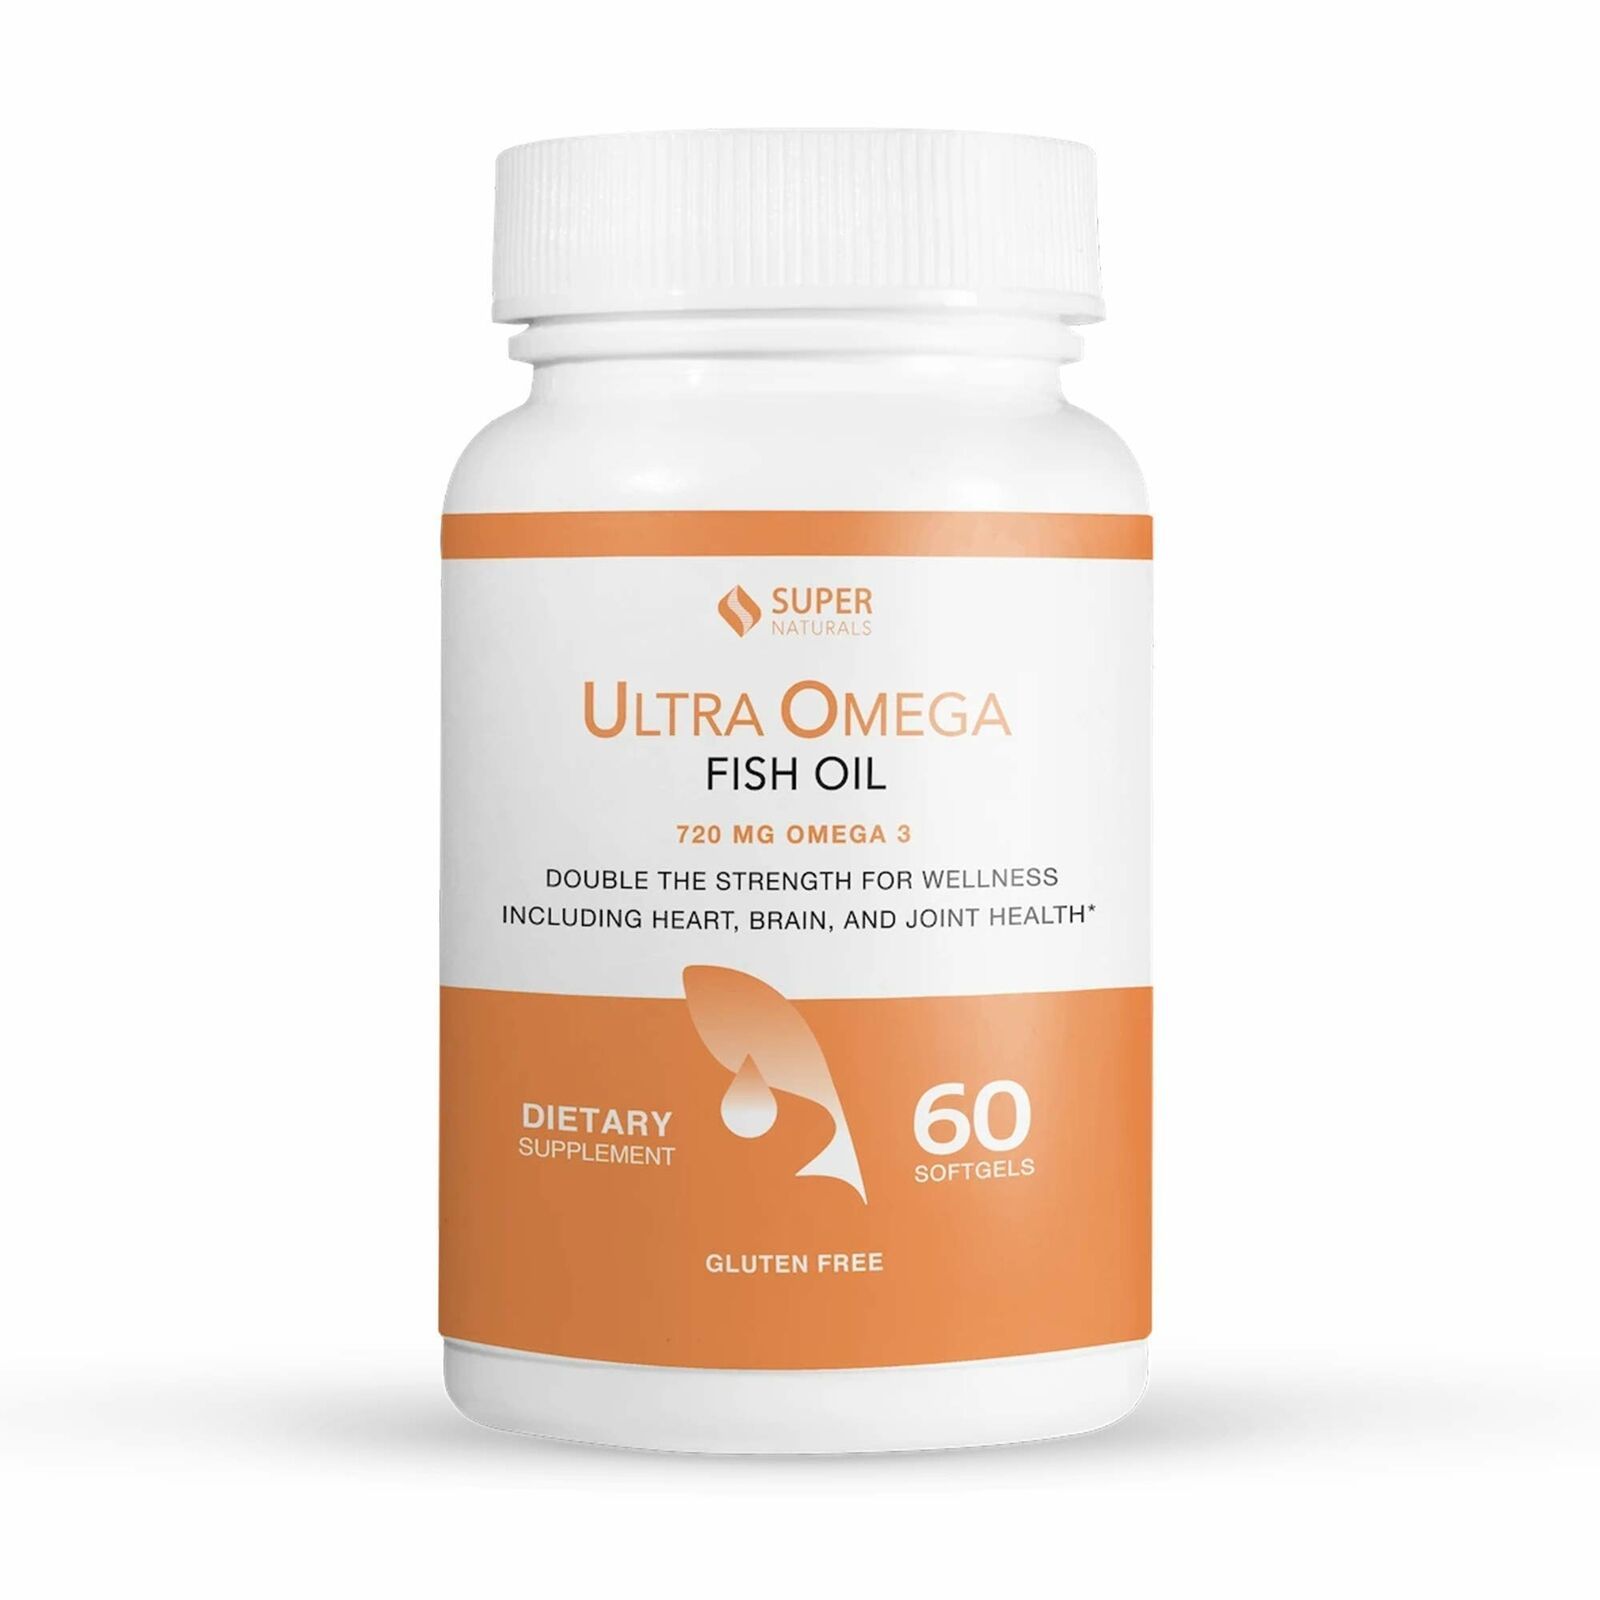 Super Natural Ultra Omega Fish Oil - Supports Brain Increased Function - $19.90